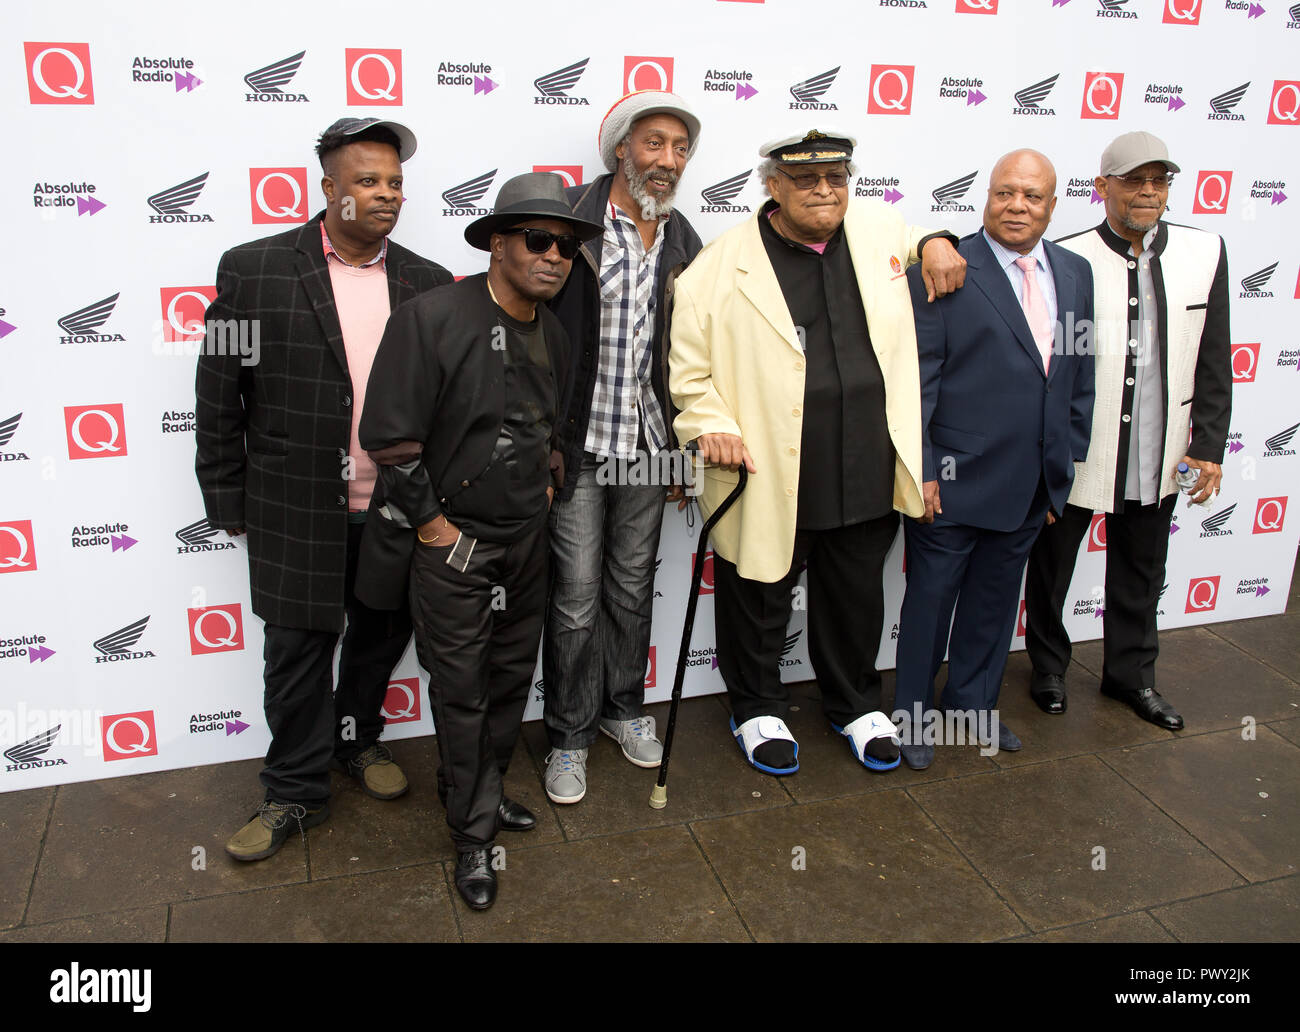 London, UK. 17th Oct 2018. The Round House Chalk Farm  London Uk 17th Oct 2018 Trojan Records arrive at the Q Awards 2018  in Association with Absolute Radio People In Picture: Bunny lee, Dave barker, Locksley Gichie,Chip Richards, Credit: Dean Fardell / Alamy Live News Stock Photo